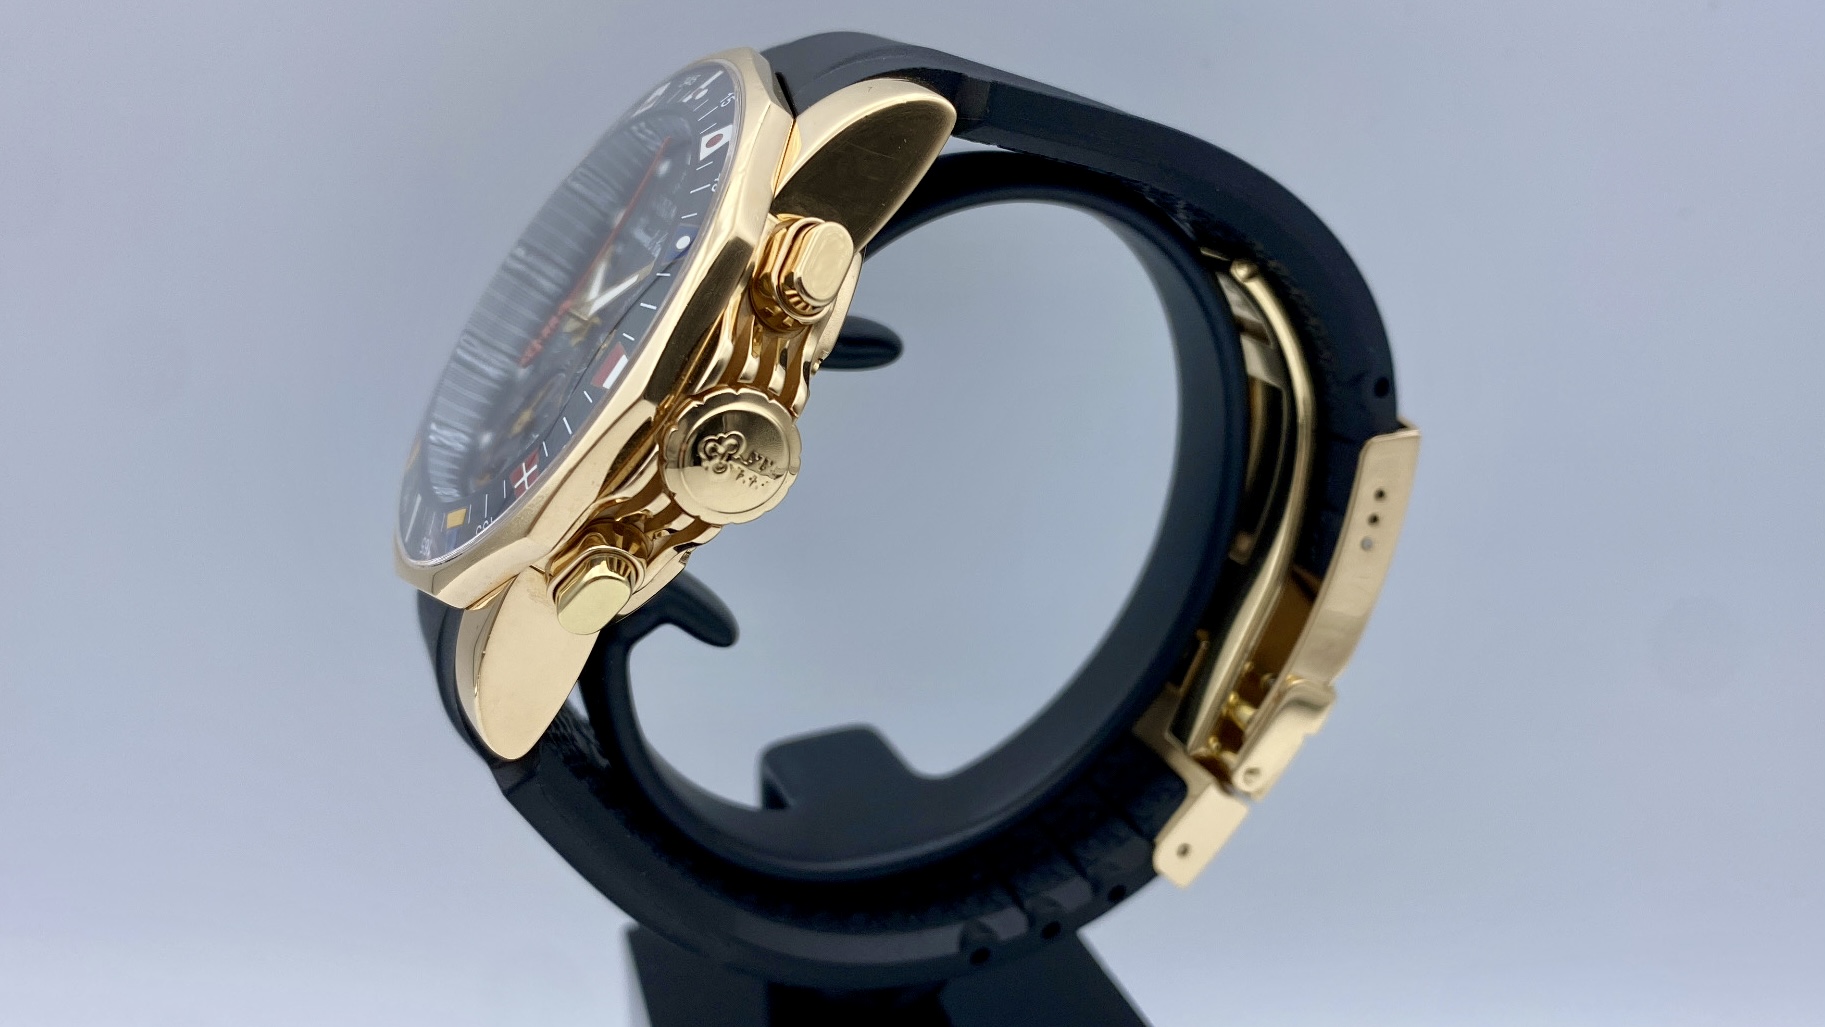 Corum Admiral's Cup - 985.671.55